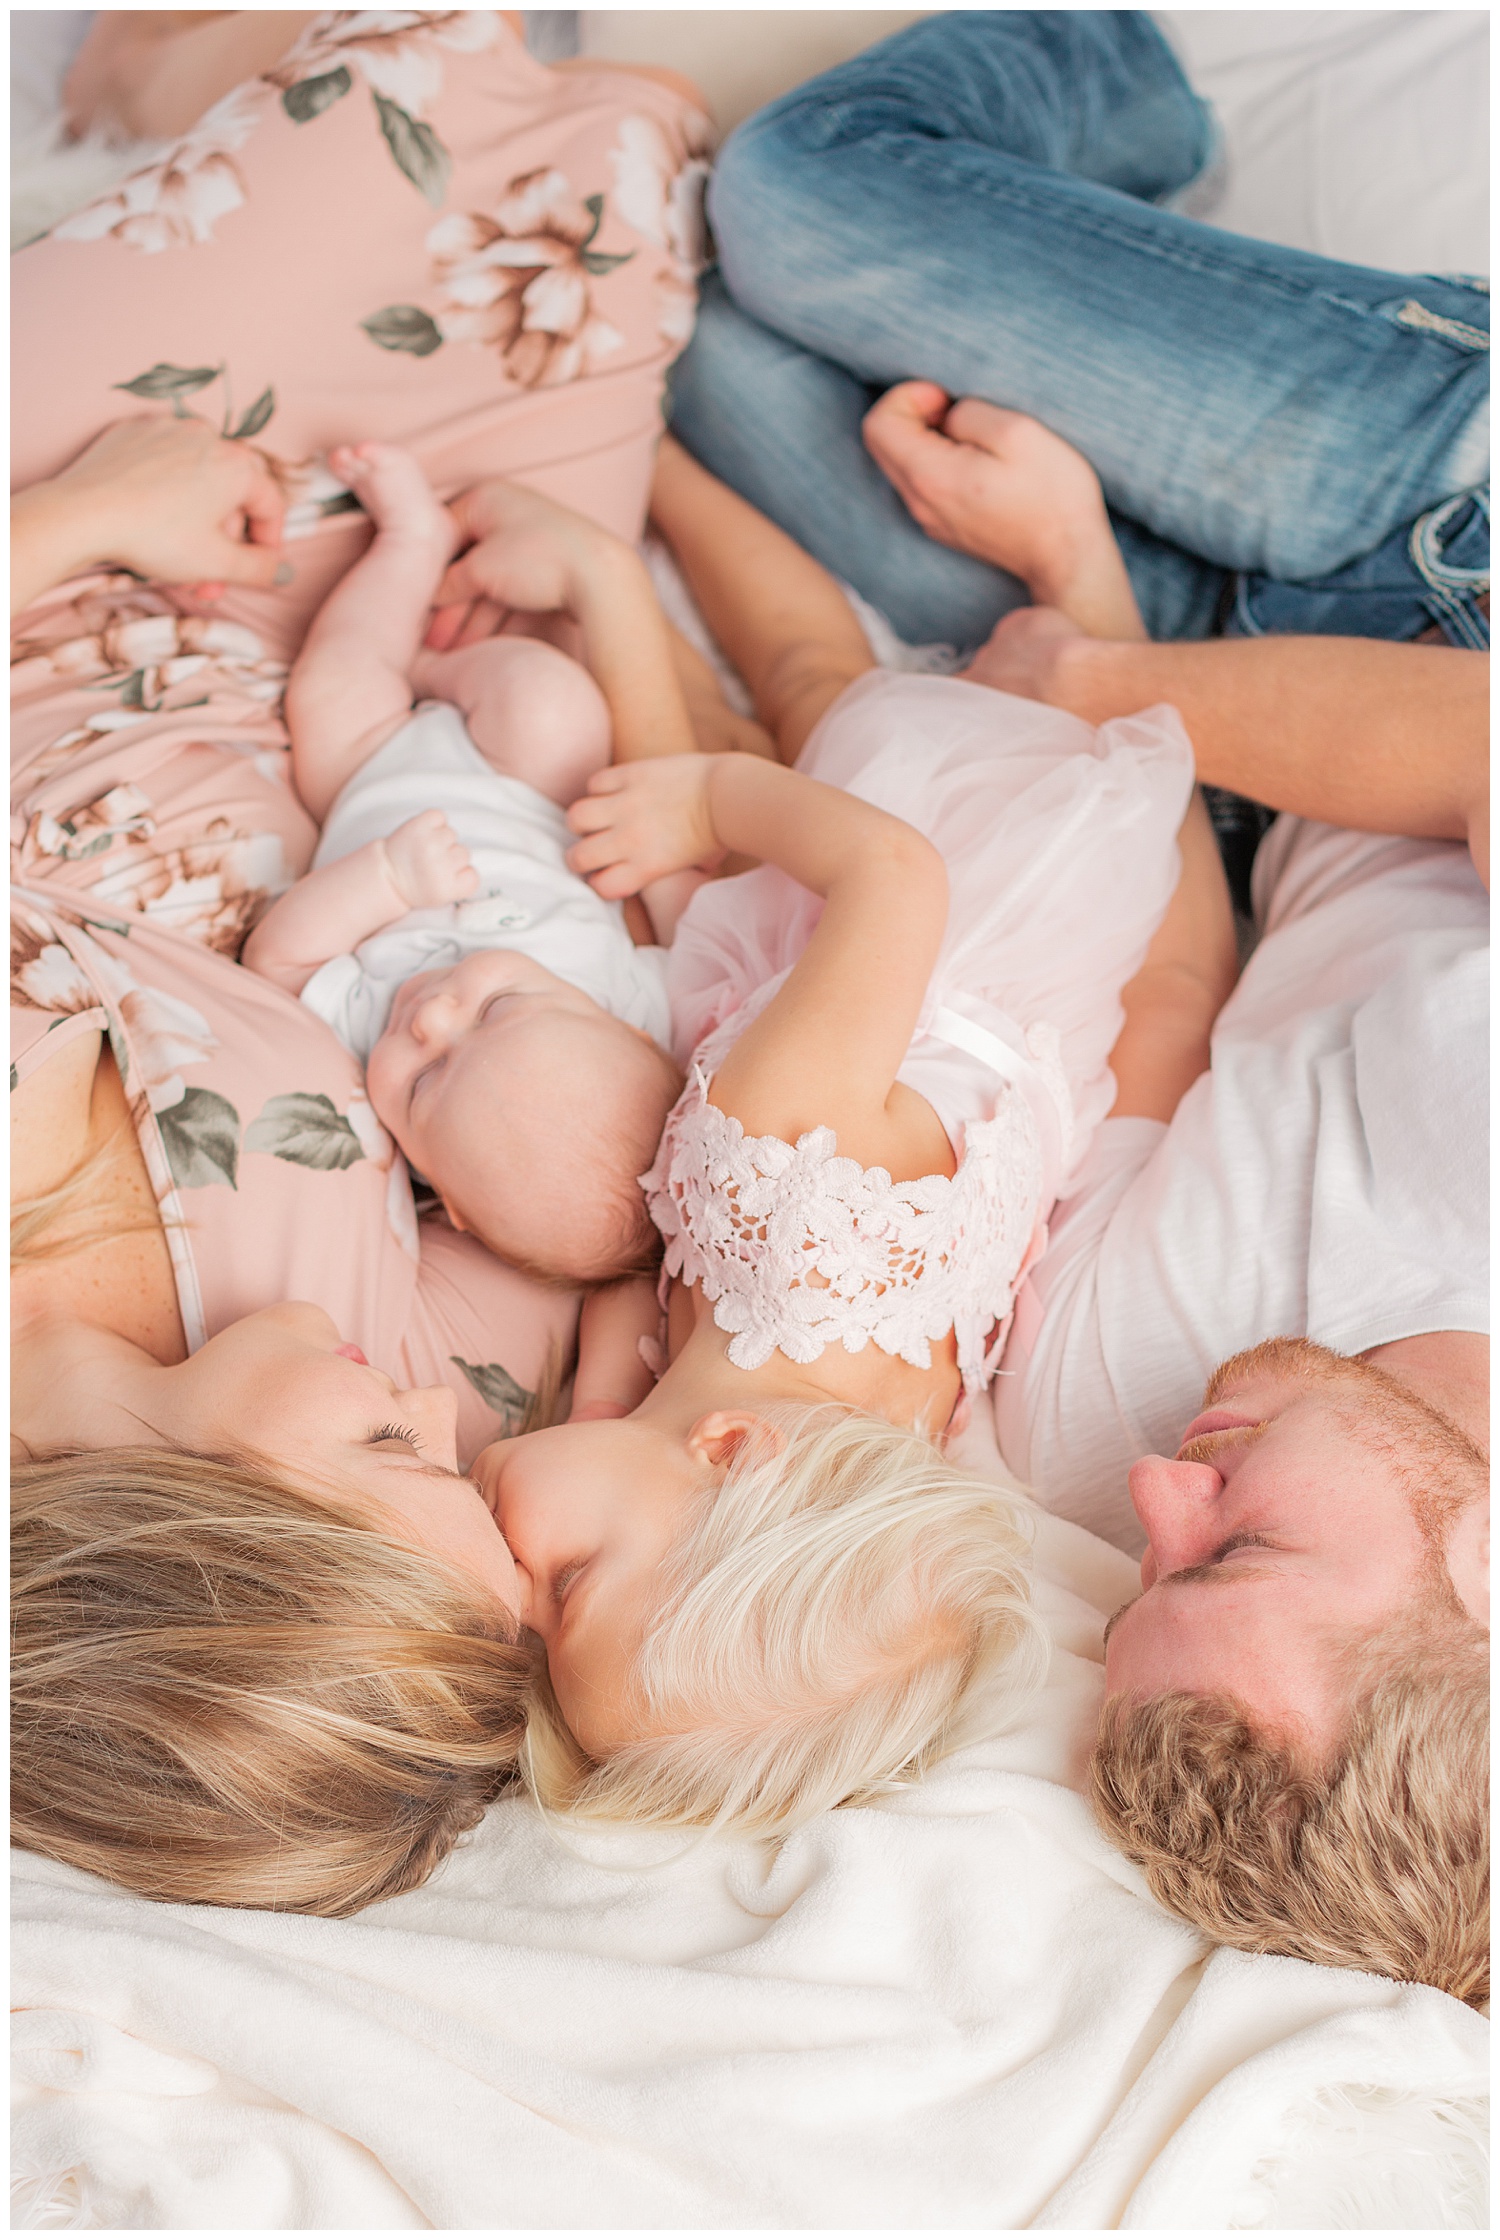 A young family snuggle together during a snuggle photography session | CB Studio